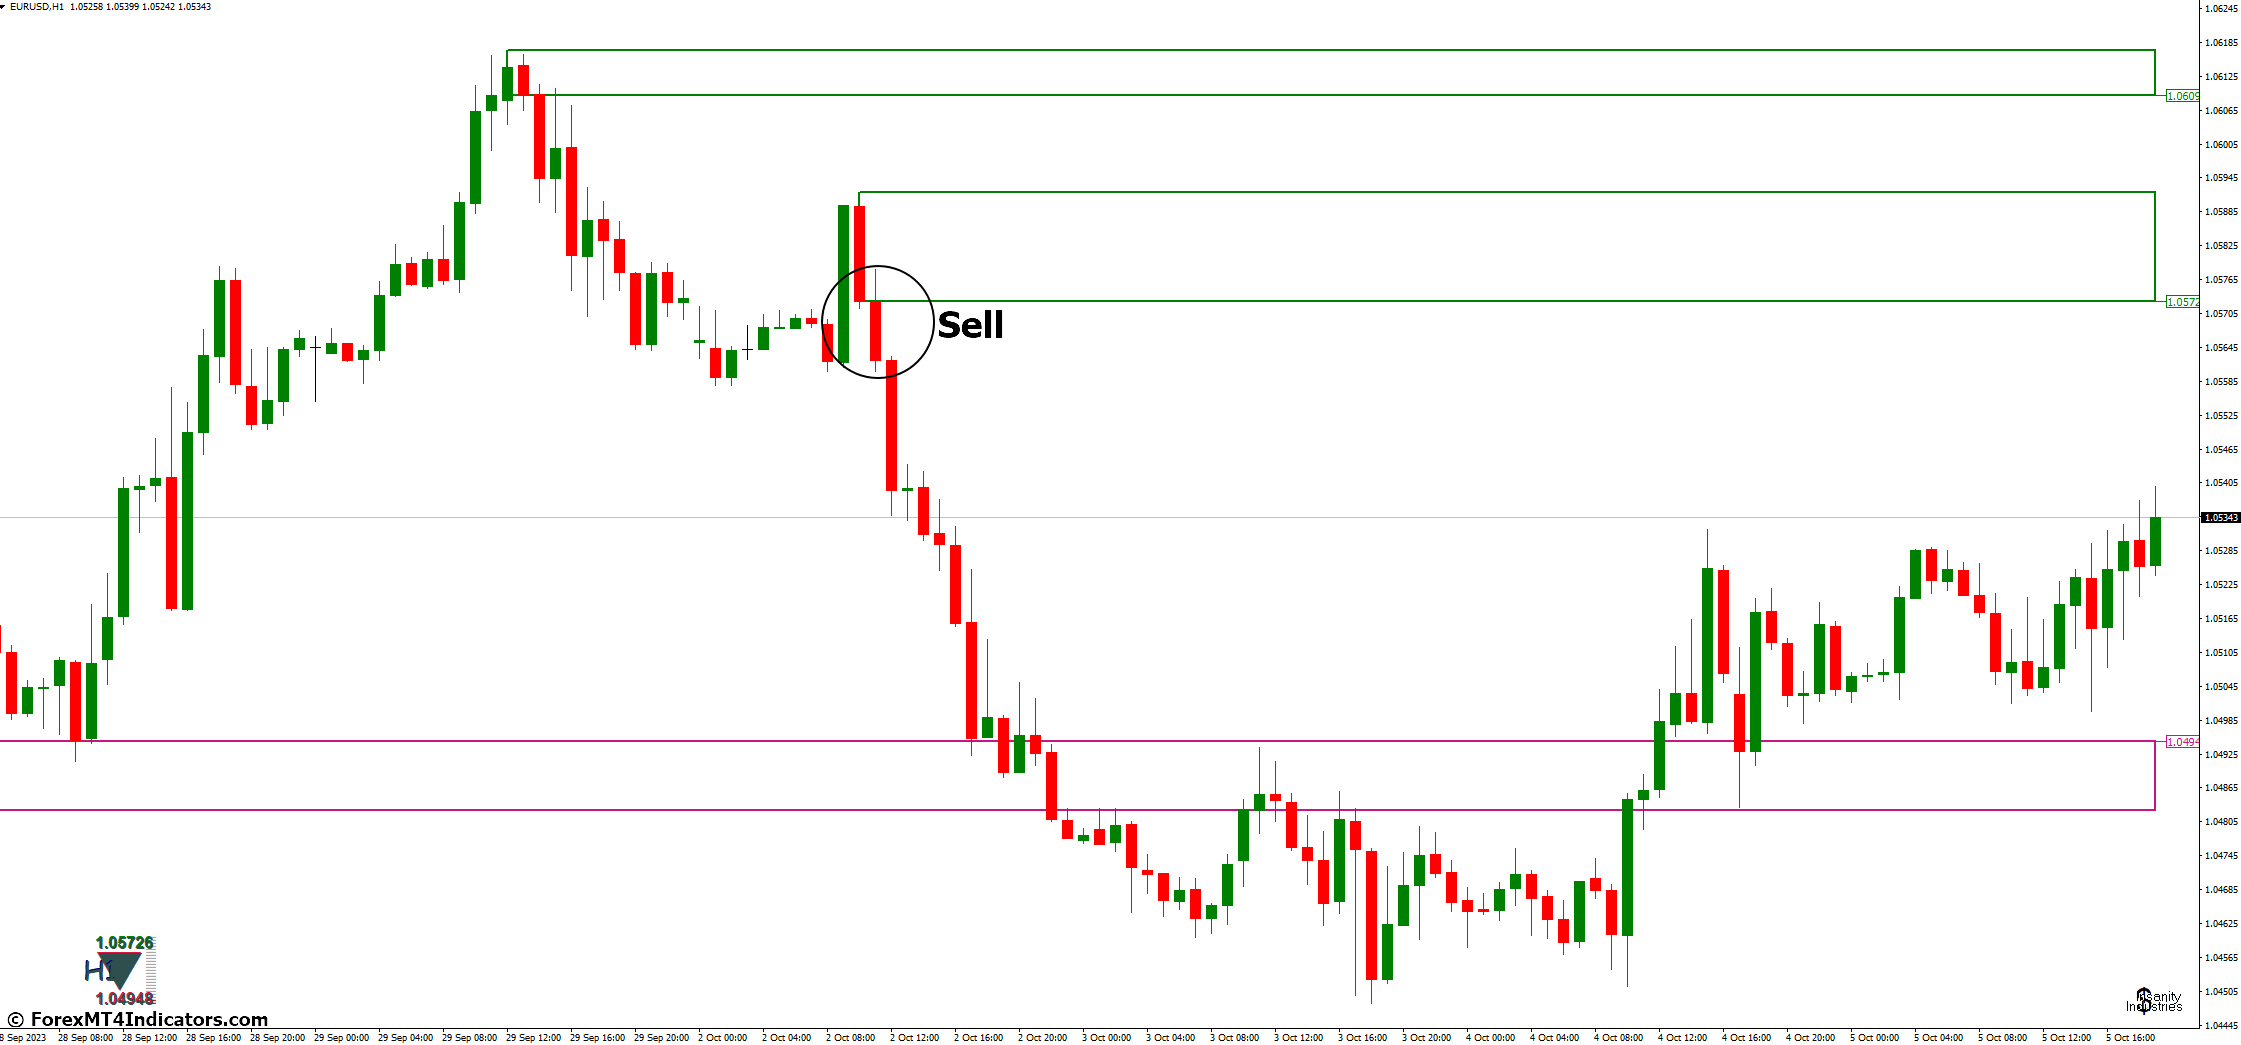 How to Trade with II SupDem MT4 Indicator - Sell Entry